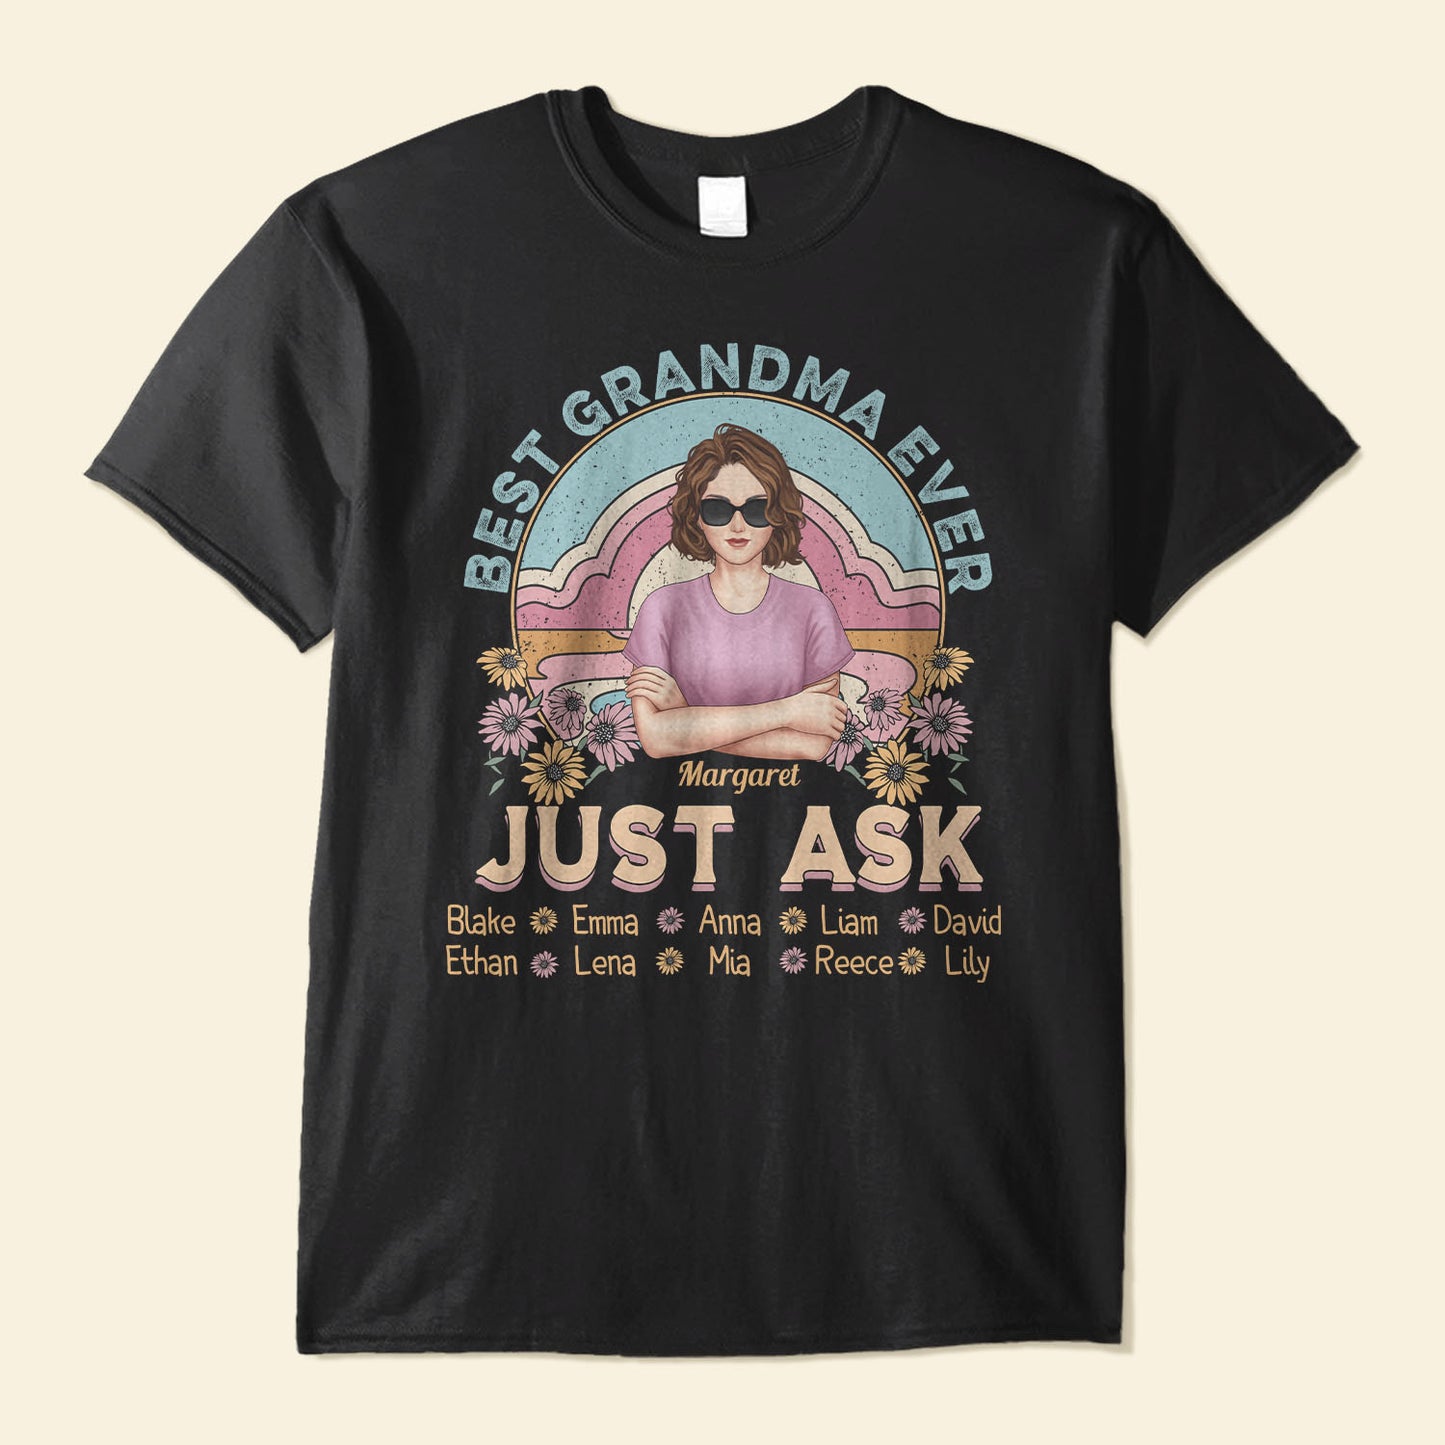 Best Grandma Ever Ever Ever - Personalized Shirt - Funny Gift Birthday Gift For Grandma, Nana, Mom - Gift From Daughters, Sons, Husband For Wife